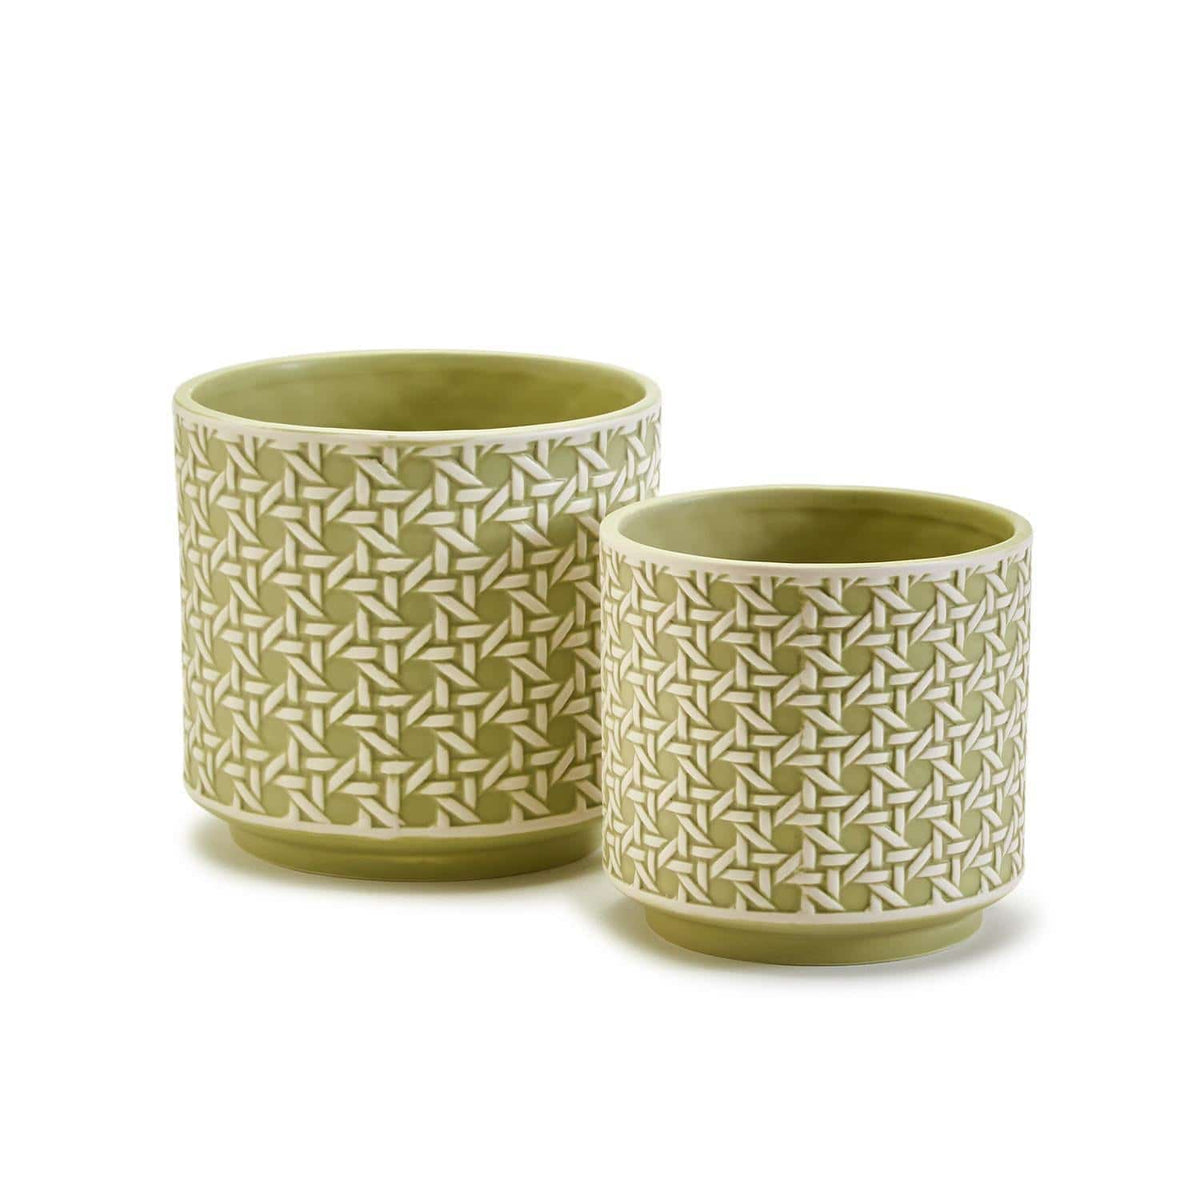 Green Embossed Cane Cachepot - 2 sizes - The Preppy Bunny